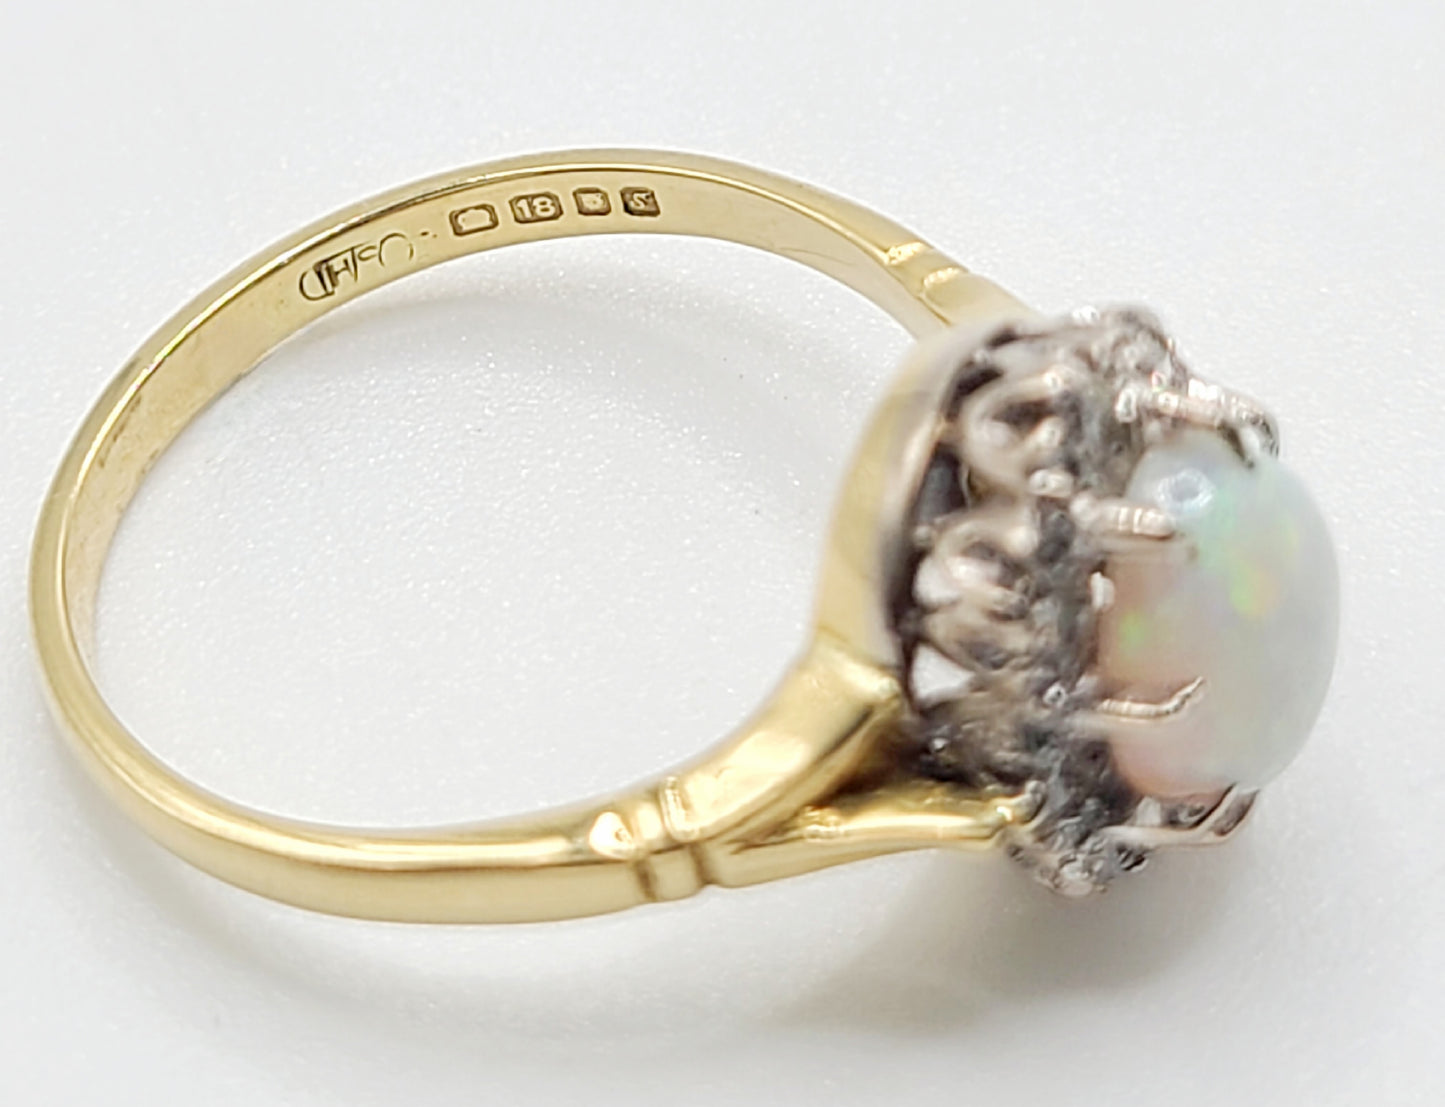 18ct Gold Opal & Diamond Cluster Ring